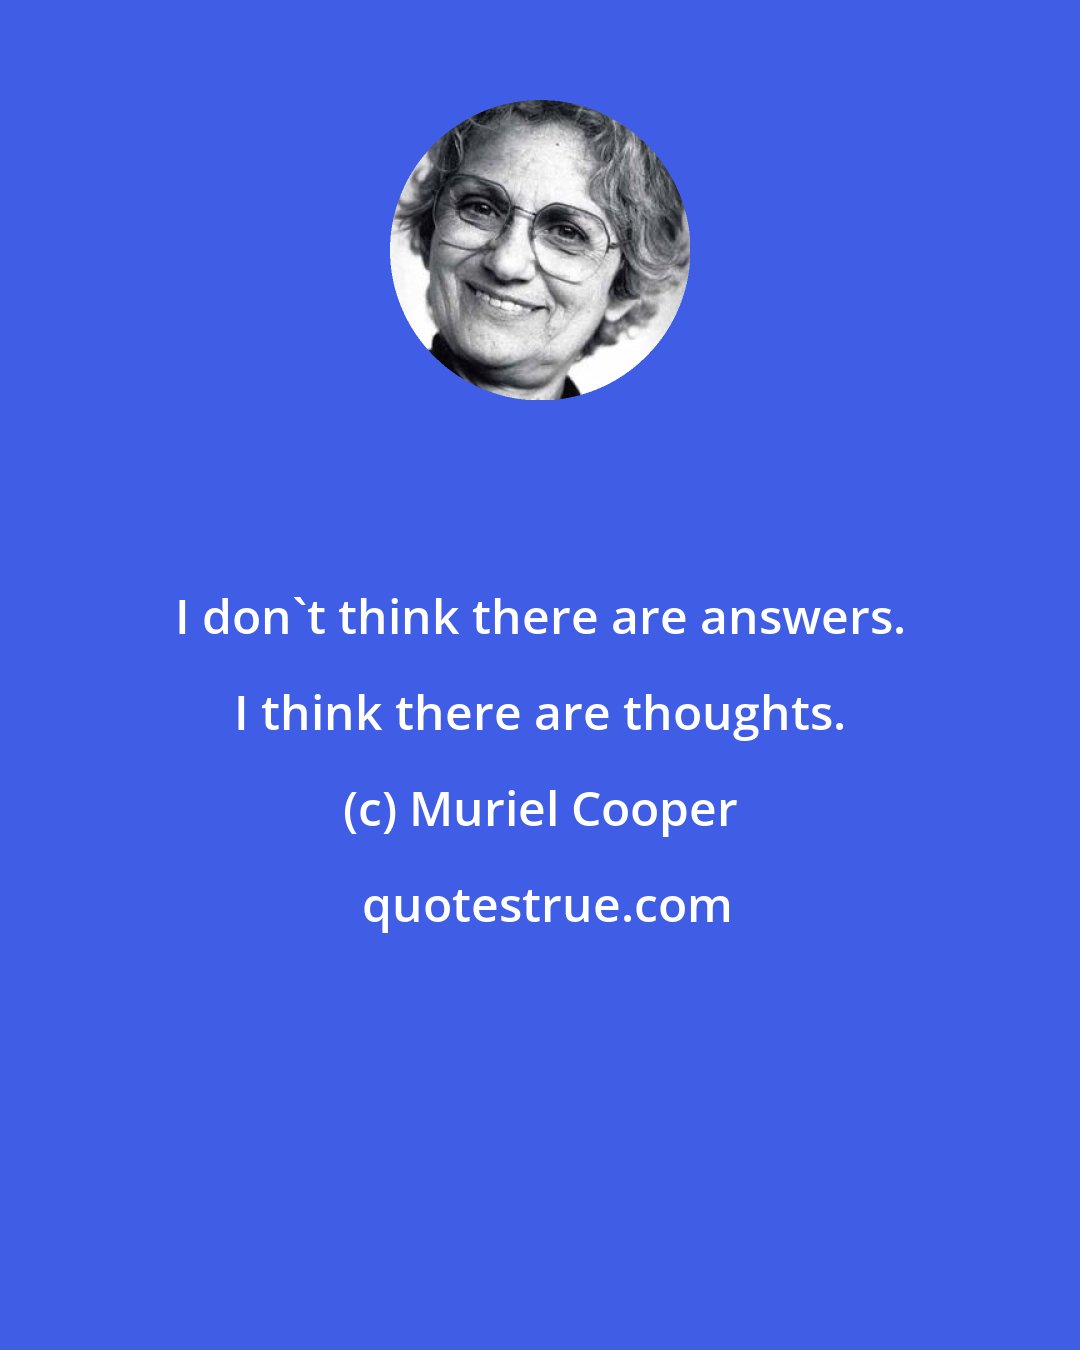 Muriel Cooper: I don't think there are answers. I think there are thoughts.